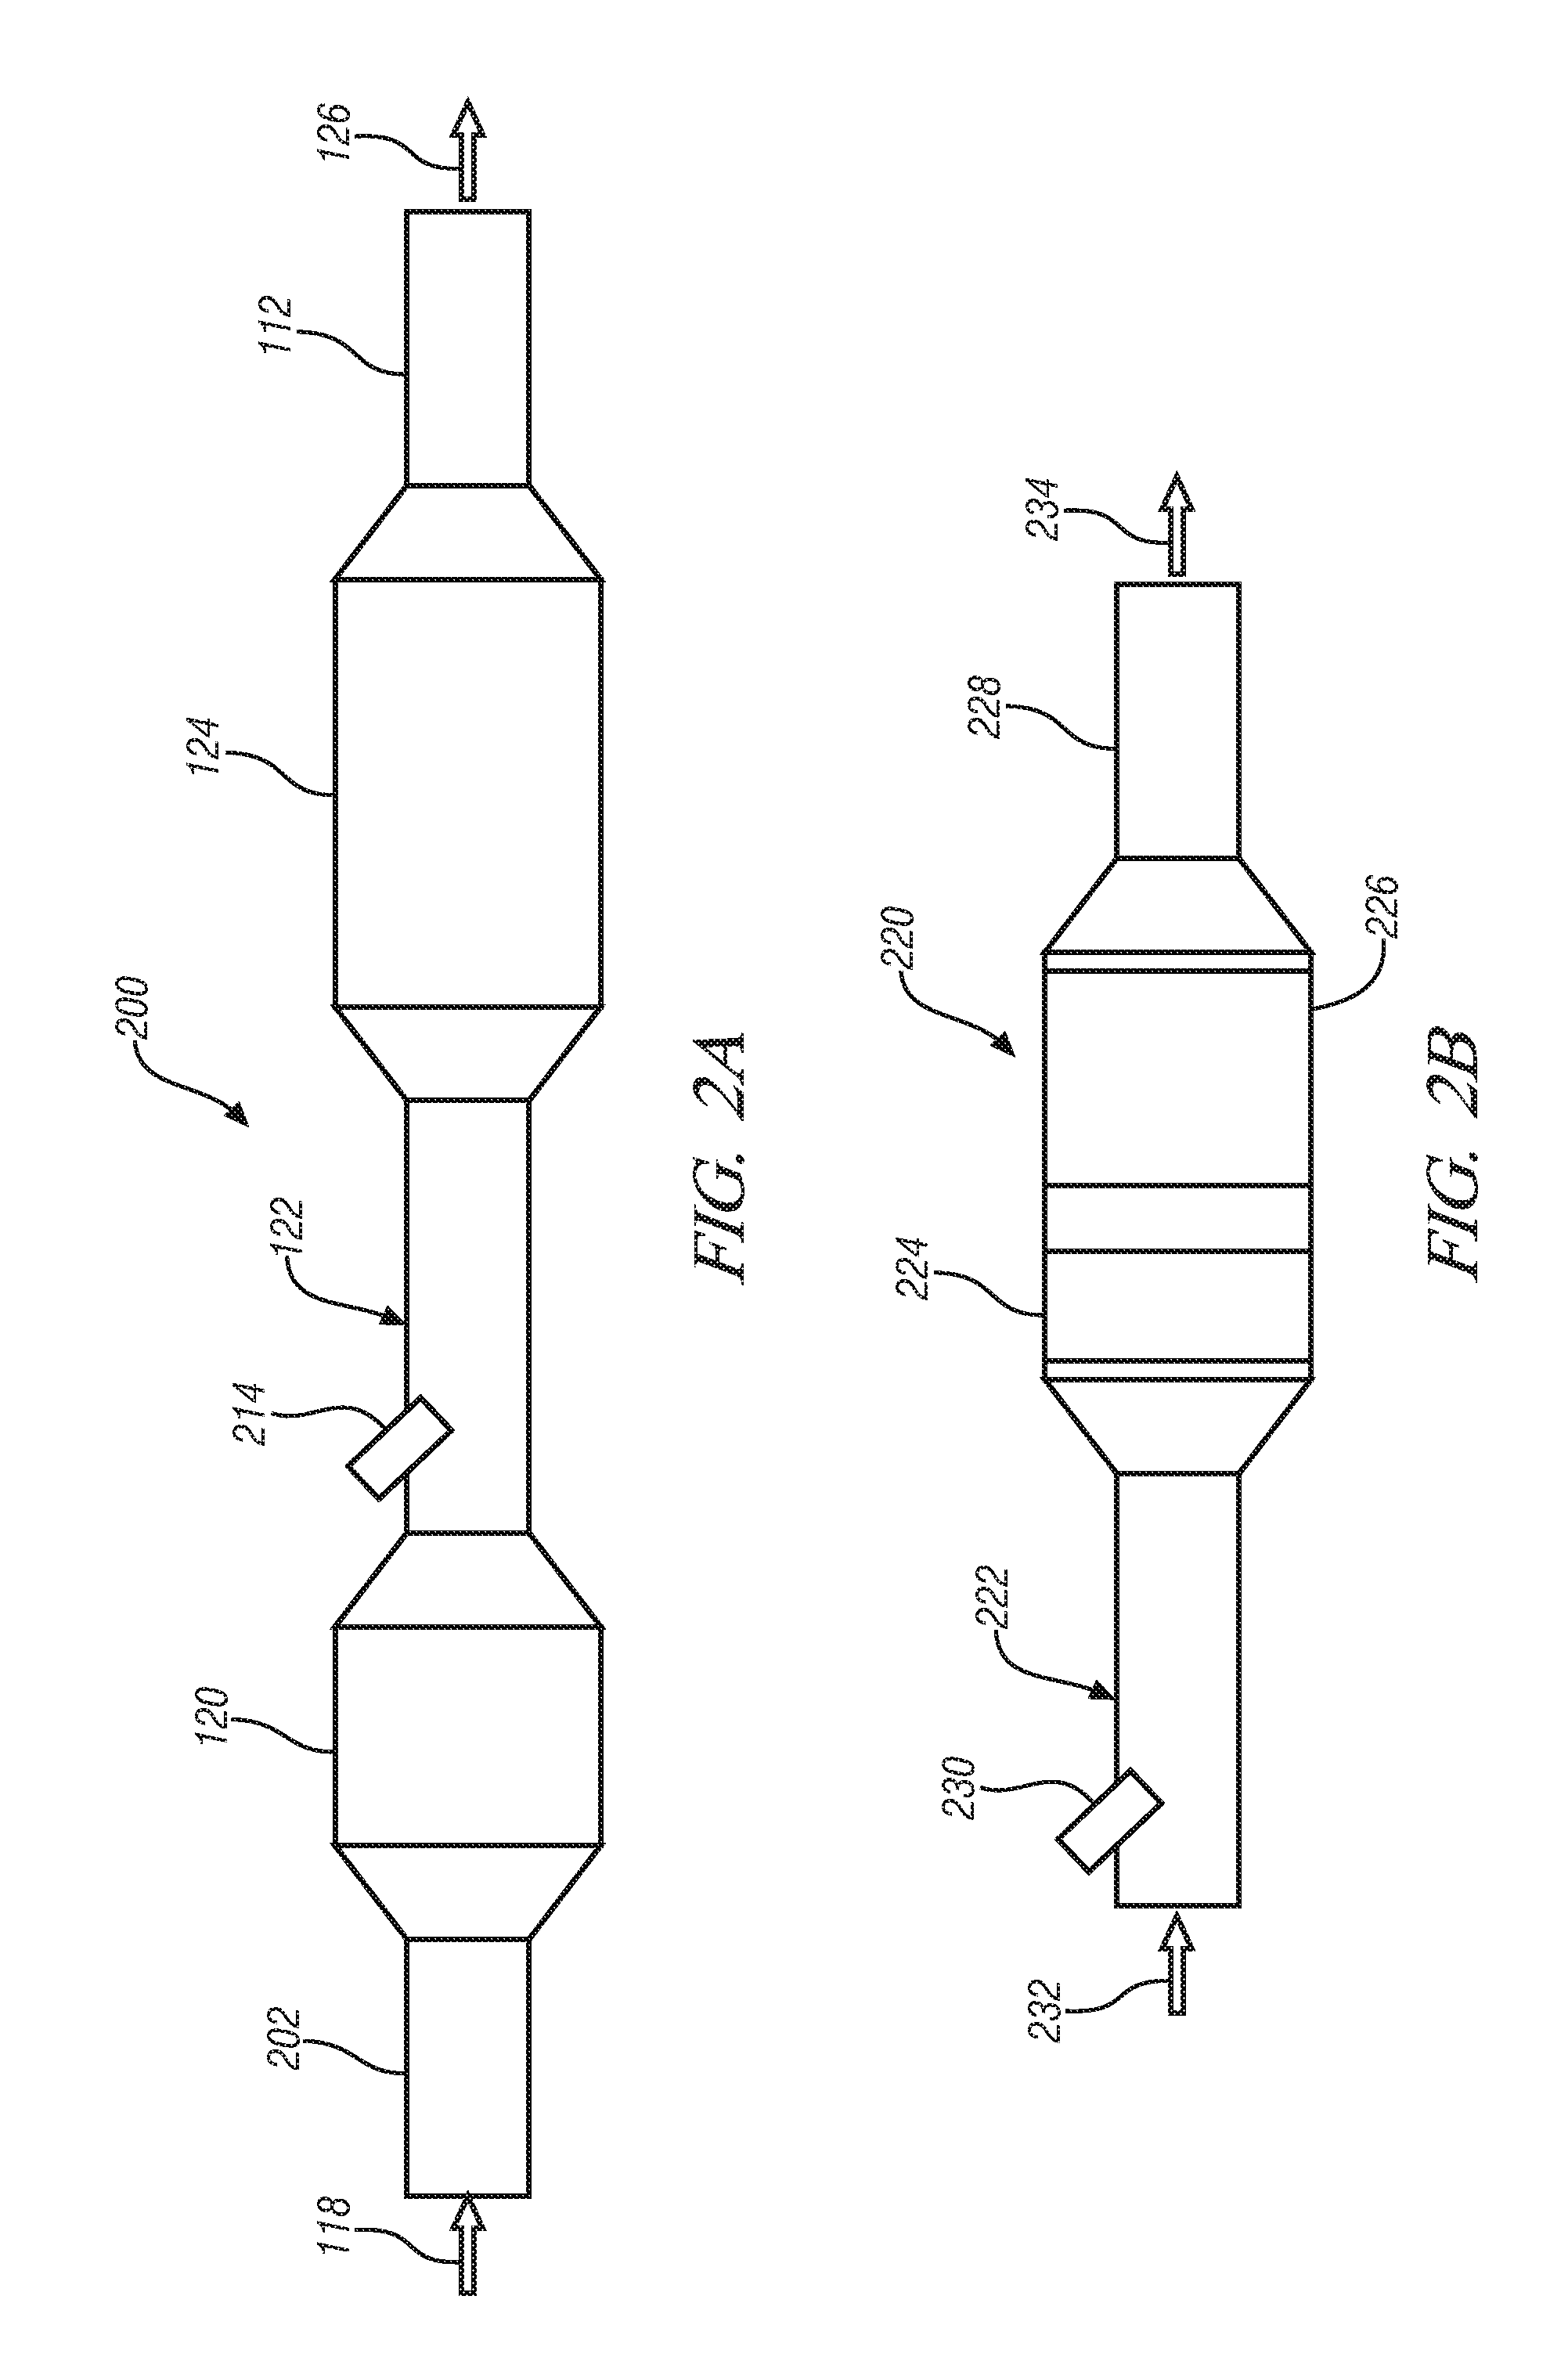 Exhaust mixer element and method for mixing